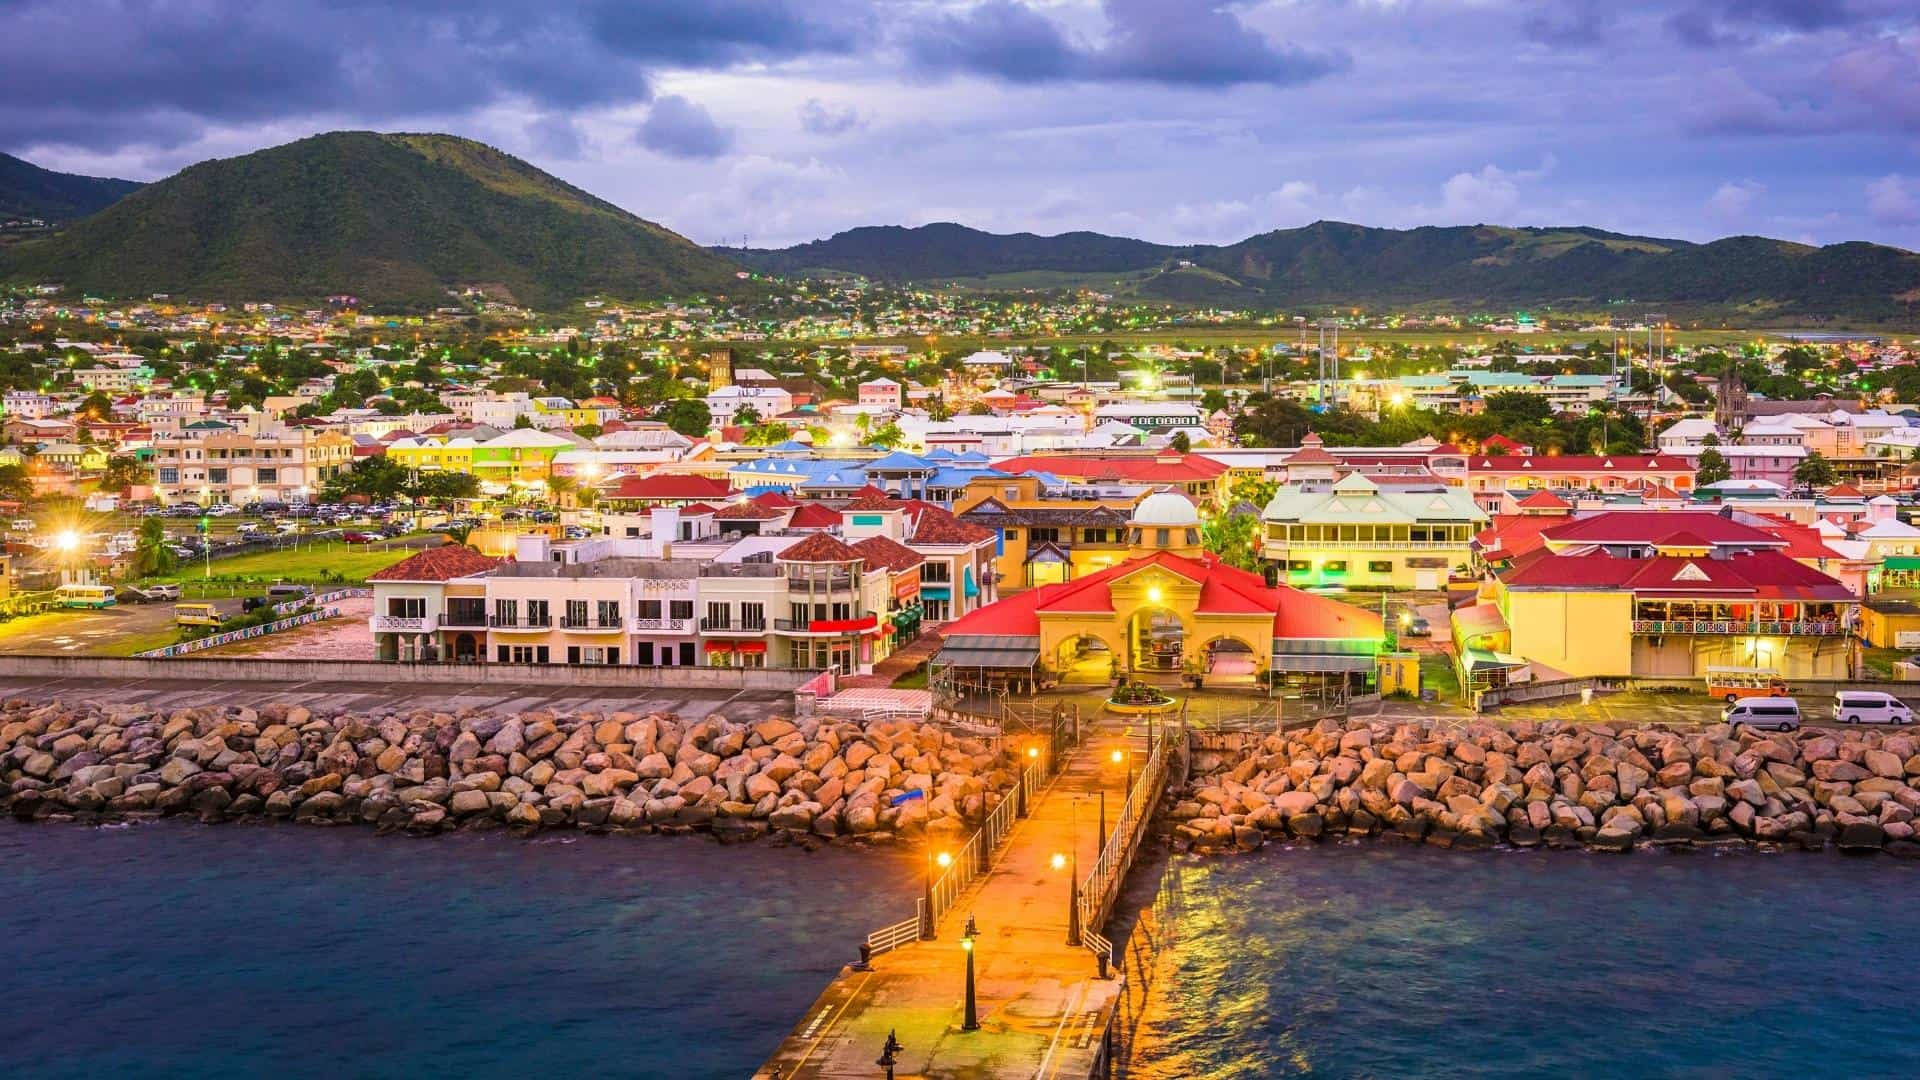 St Kitts And Nevis During Night-Time Wallpaper